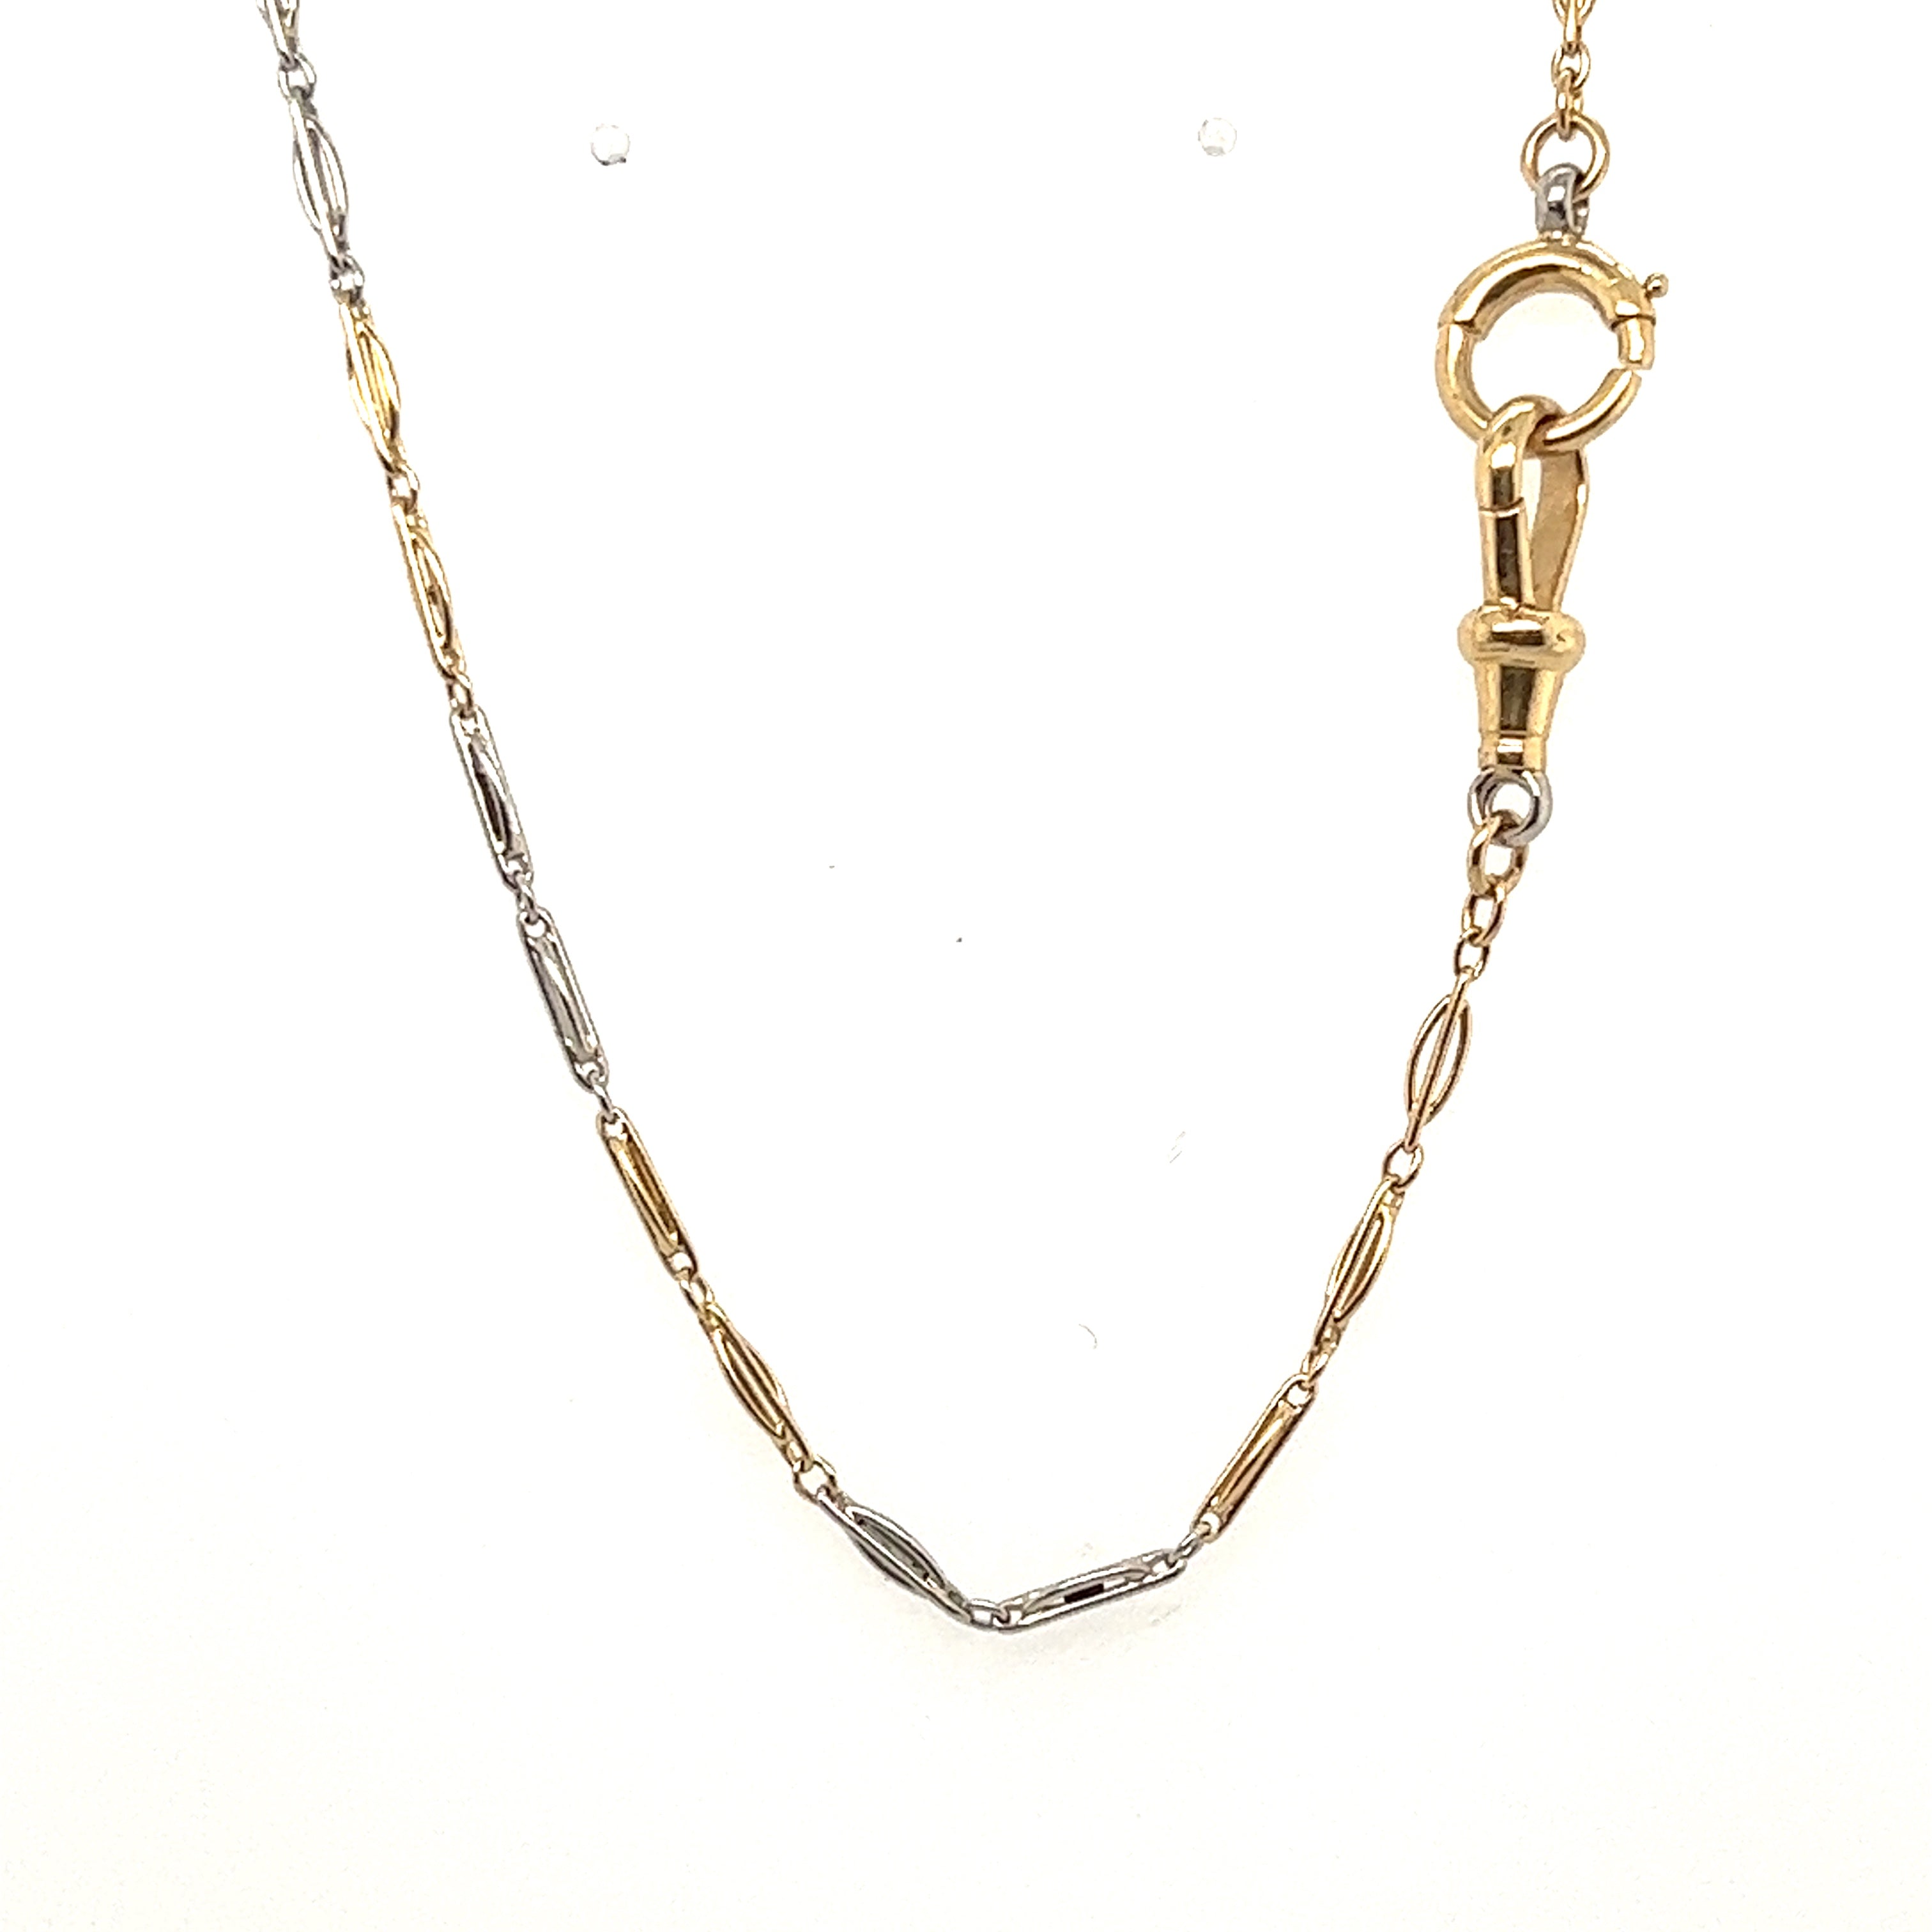 Antique Yellow and White Gold Chain with Albert Swivel Clasp